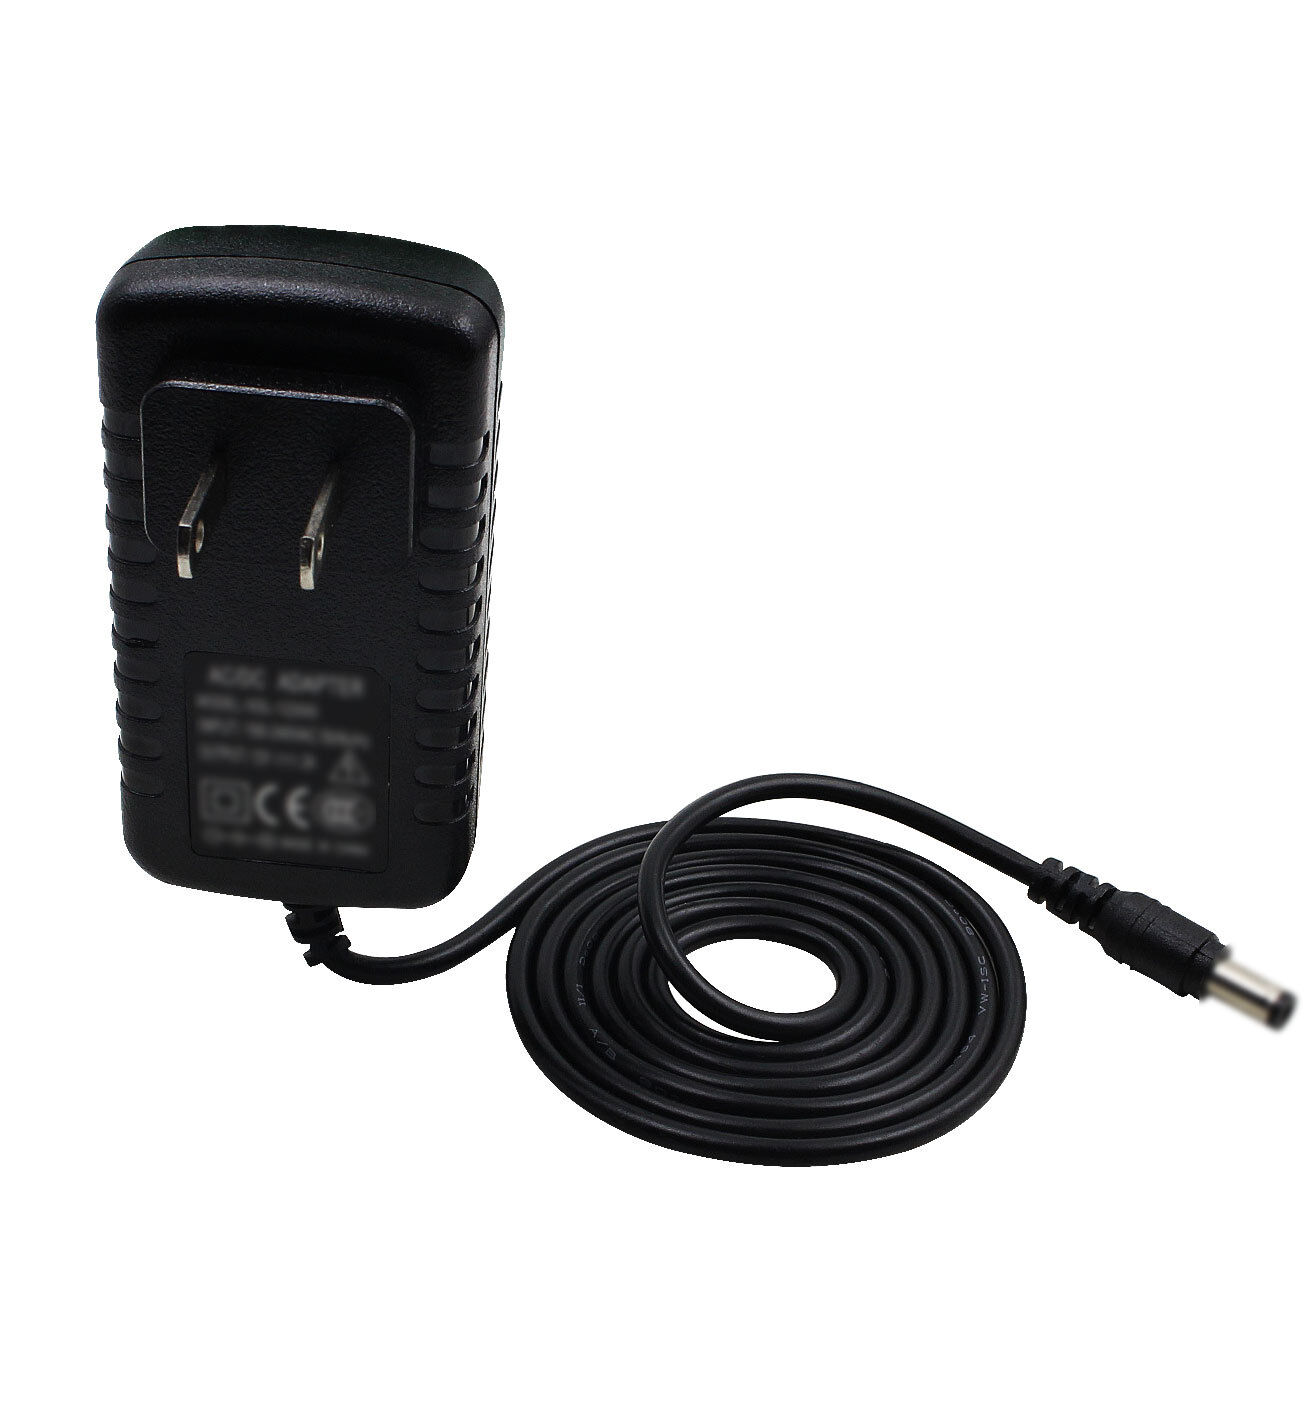 *Brand NEW*for SONY Portable Bluetooth Speaker SRS-XB3 AC Adapter Power Supply Charger